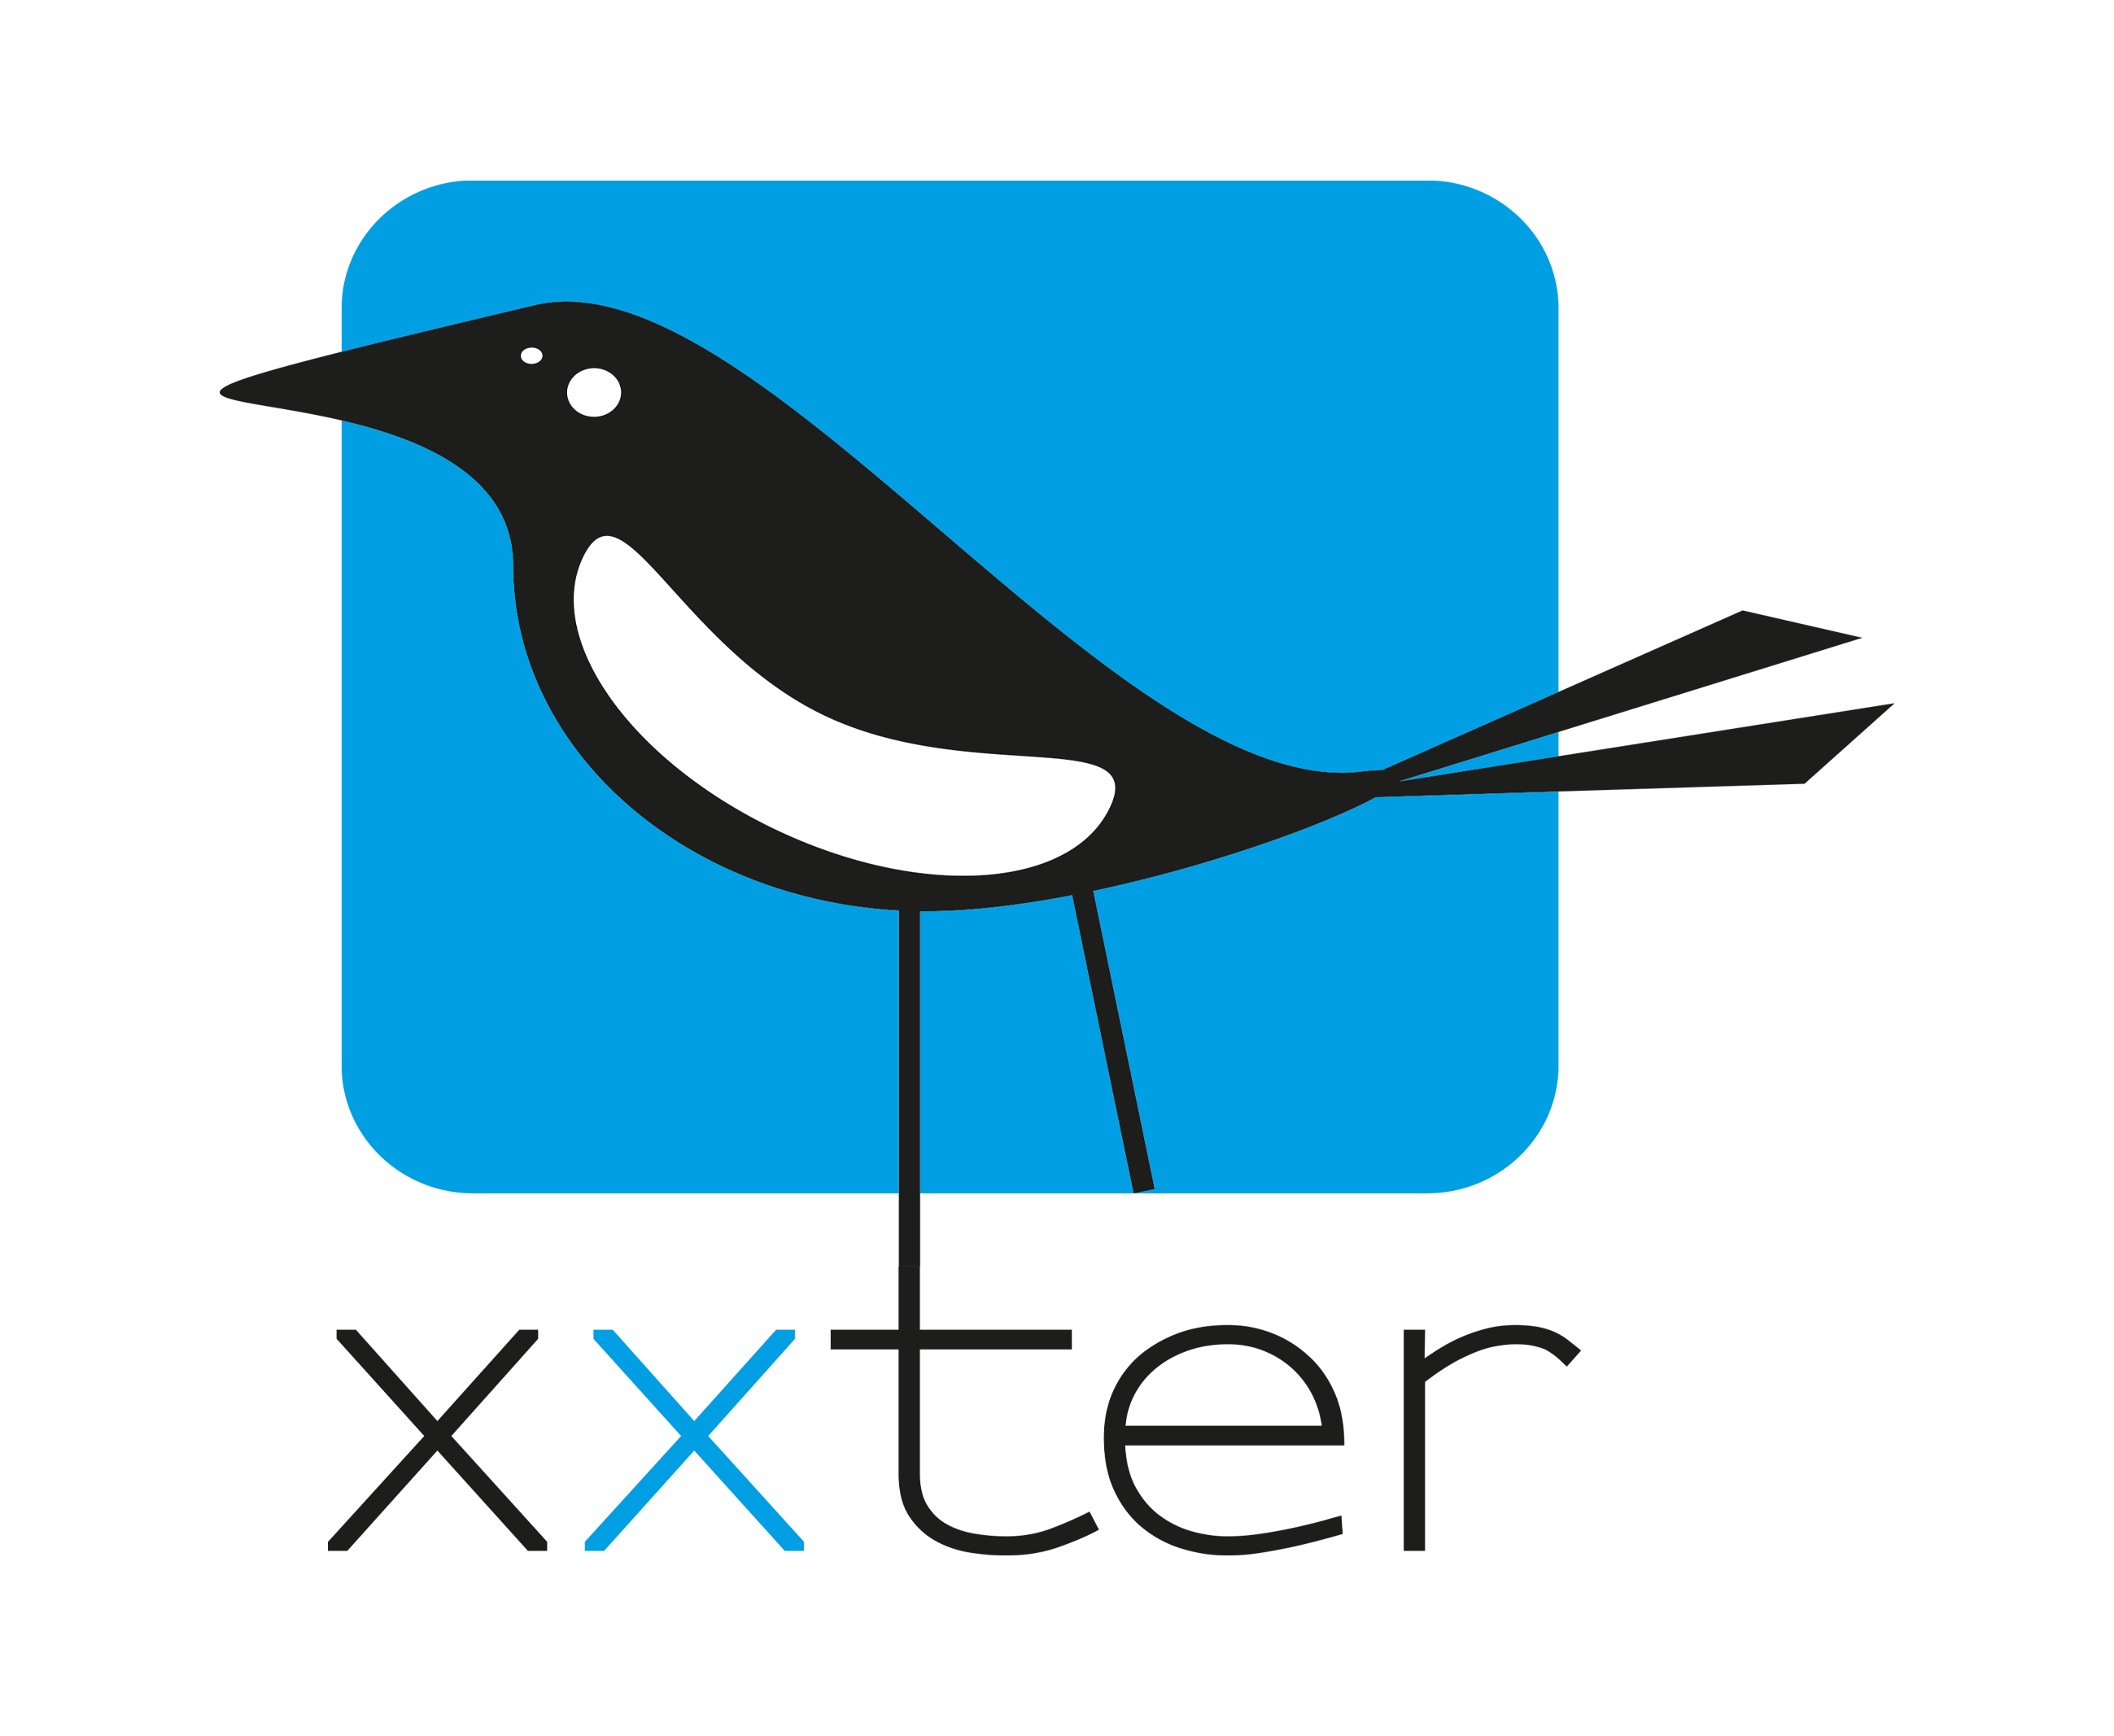 xxter-stelectric home automation from xxter